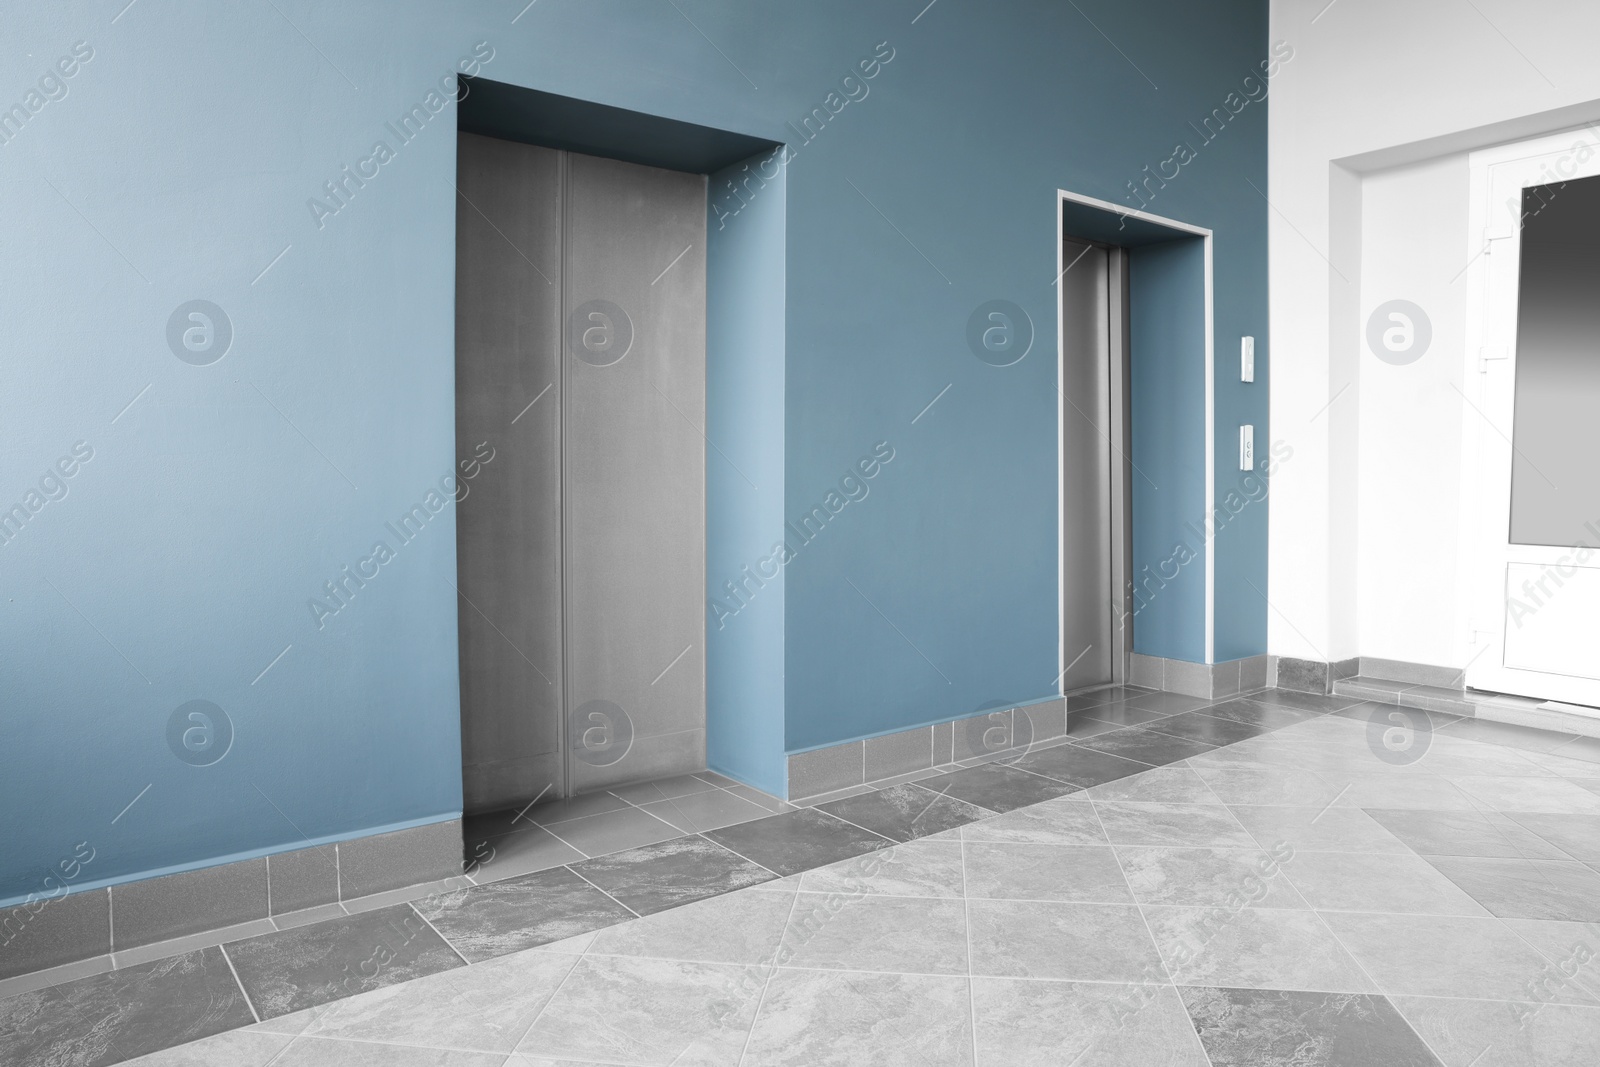 Photo of Closed stylish elevator doors in clean hall